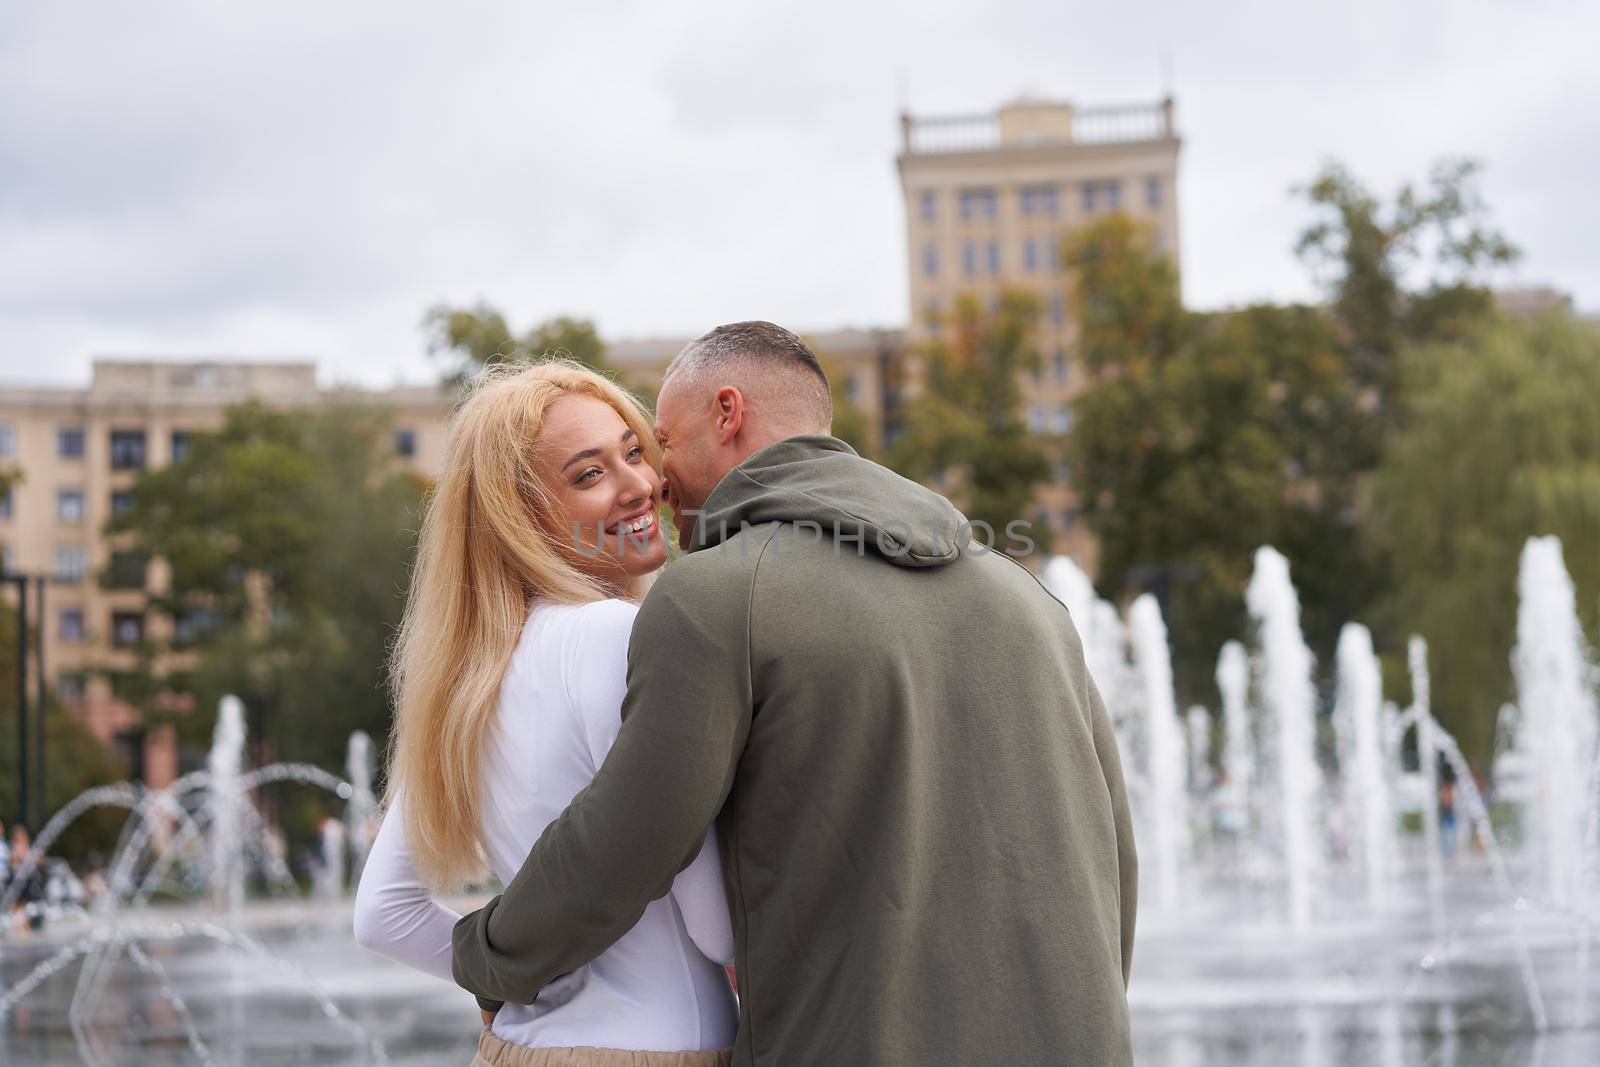 Romantic walk. Young couple in love embracing near fountain in urban park, man whispering compliments to his beautiful girlfriend